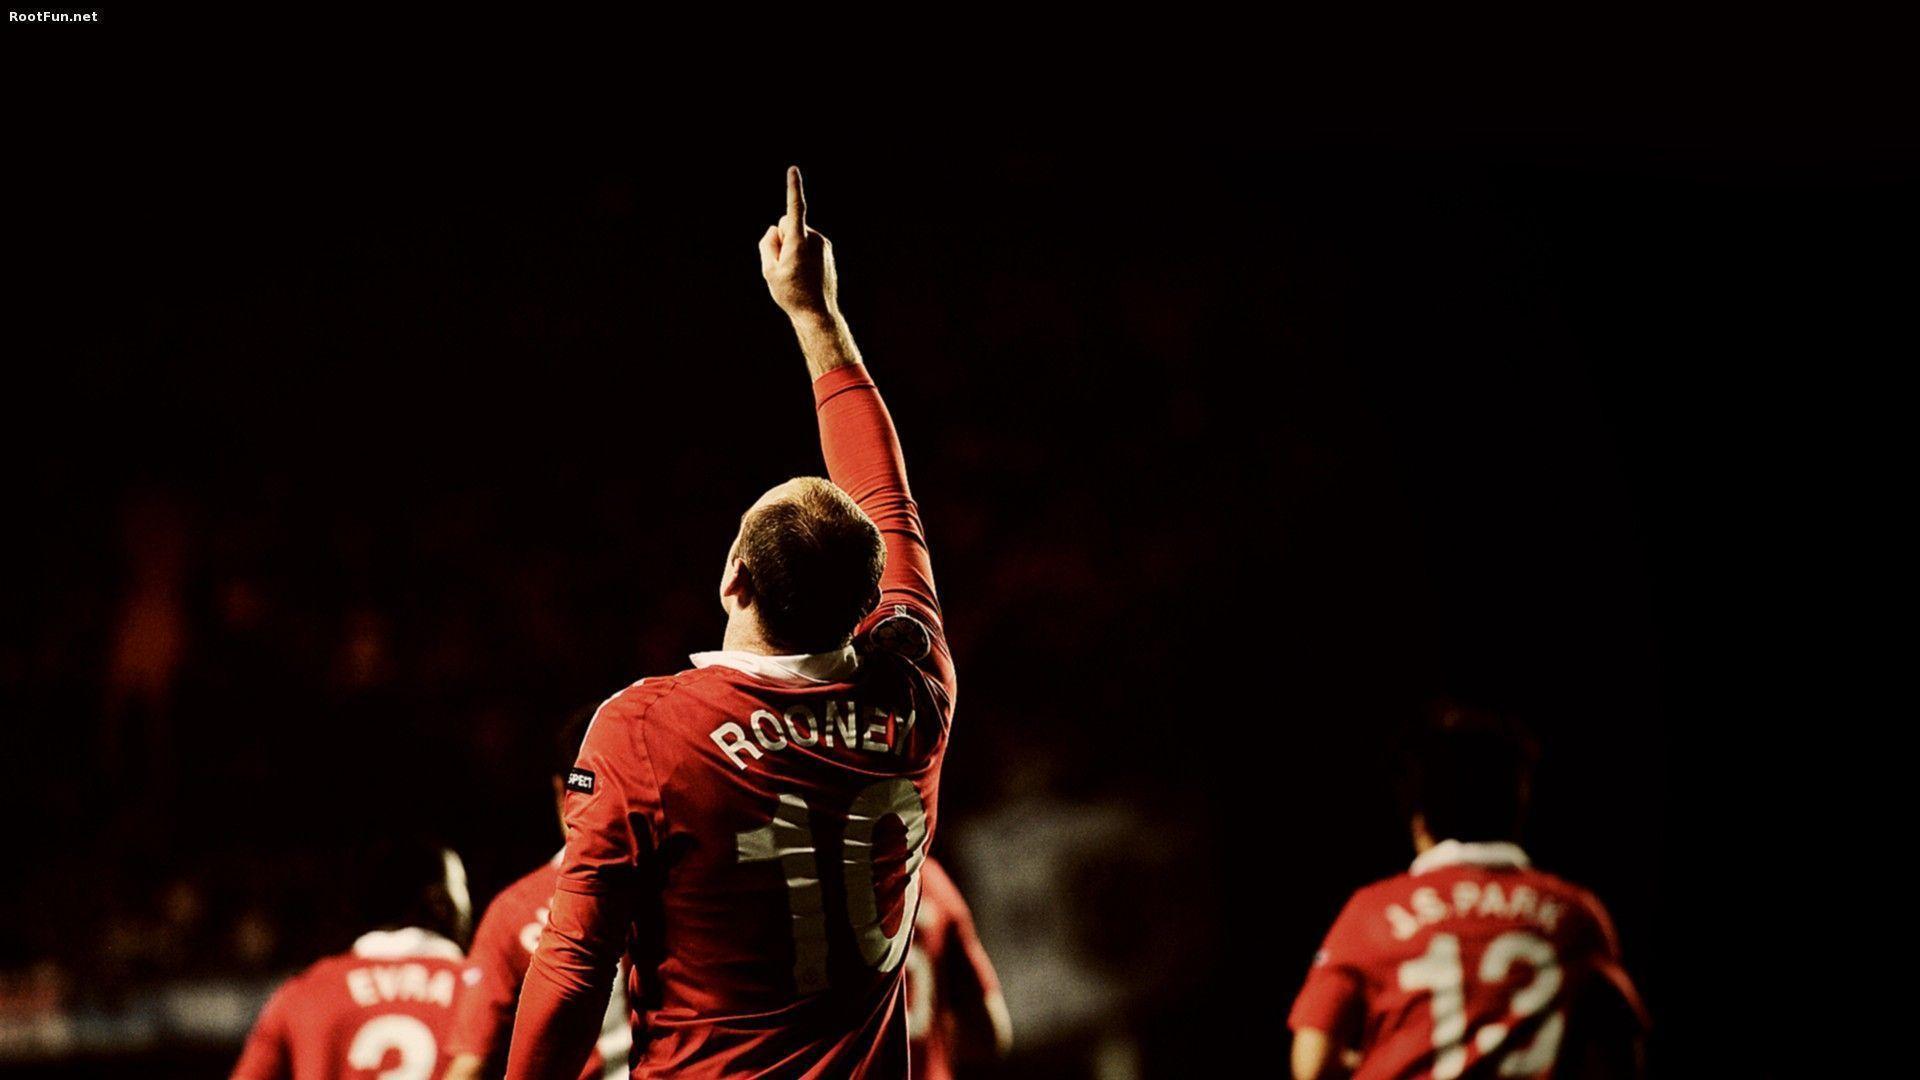 Wayne Rooney Sport Soccer wallpaper and Theme. Download free